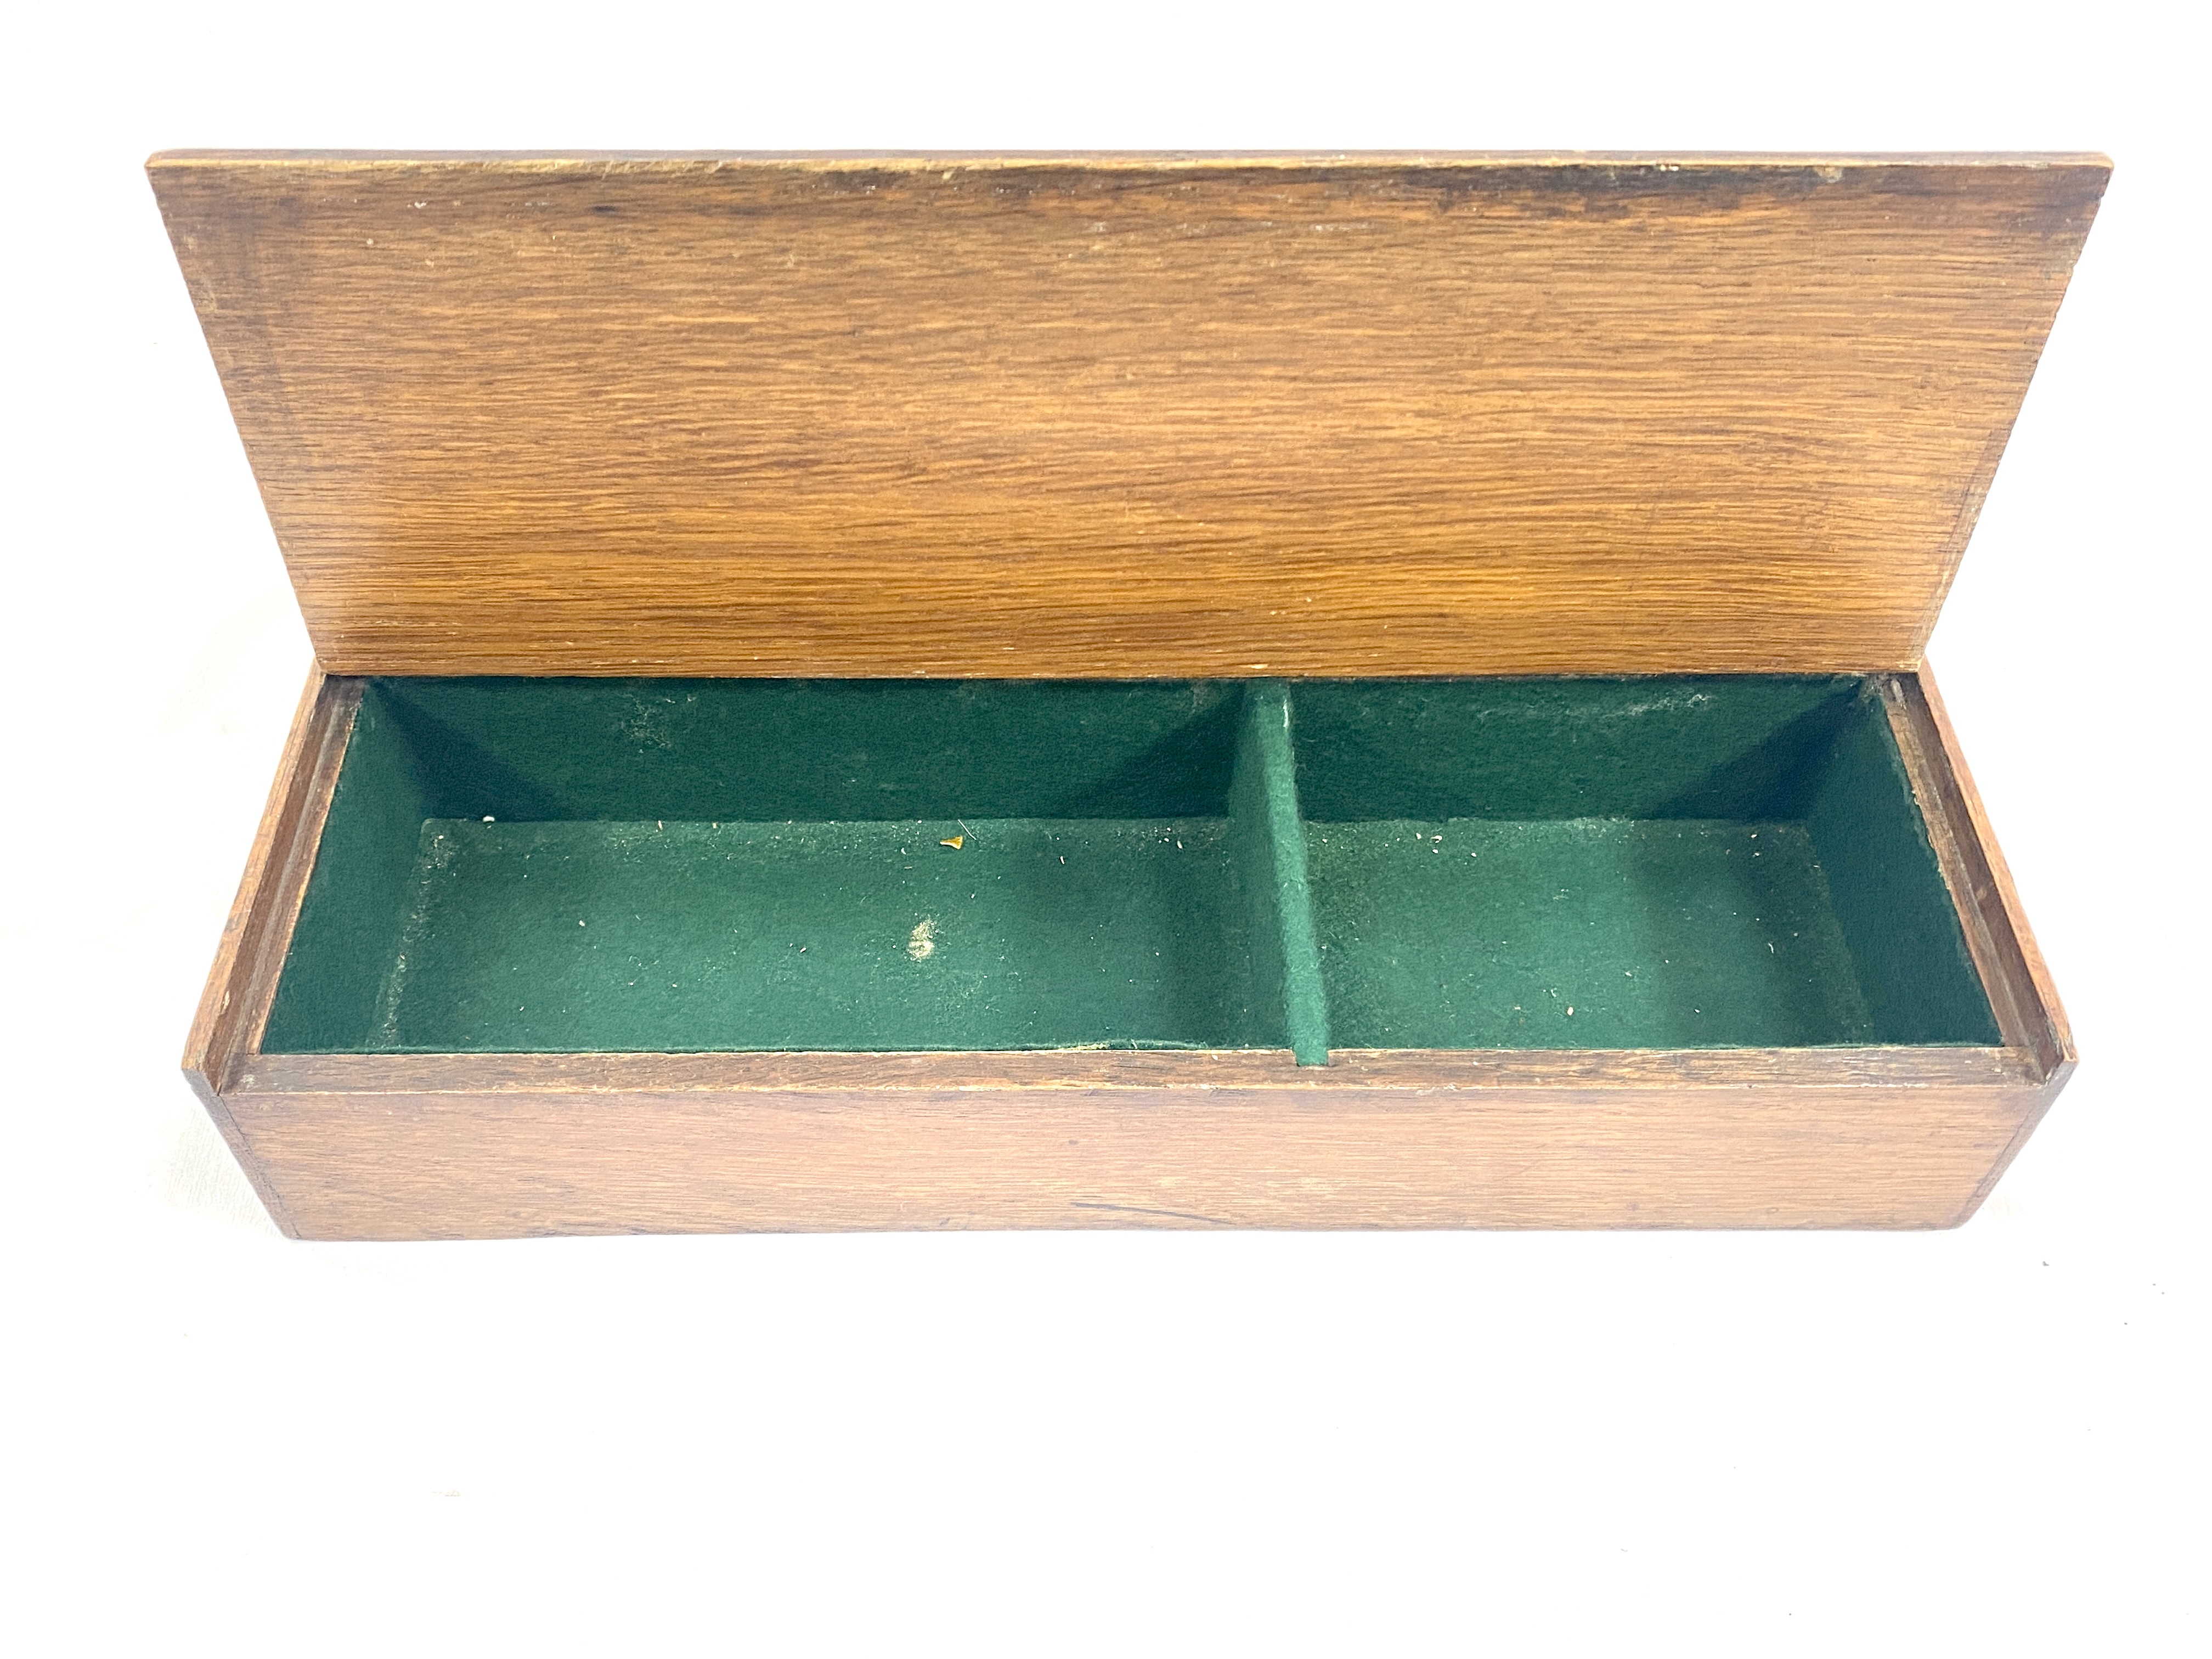 Oak cutlery box with lifting lid - Image 3 of 4